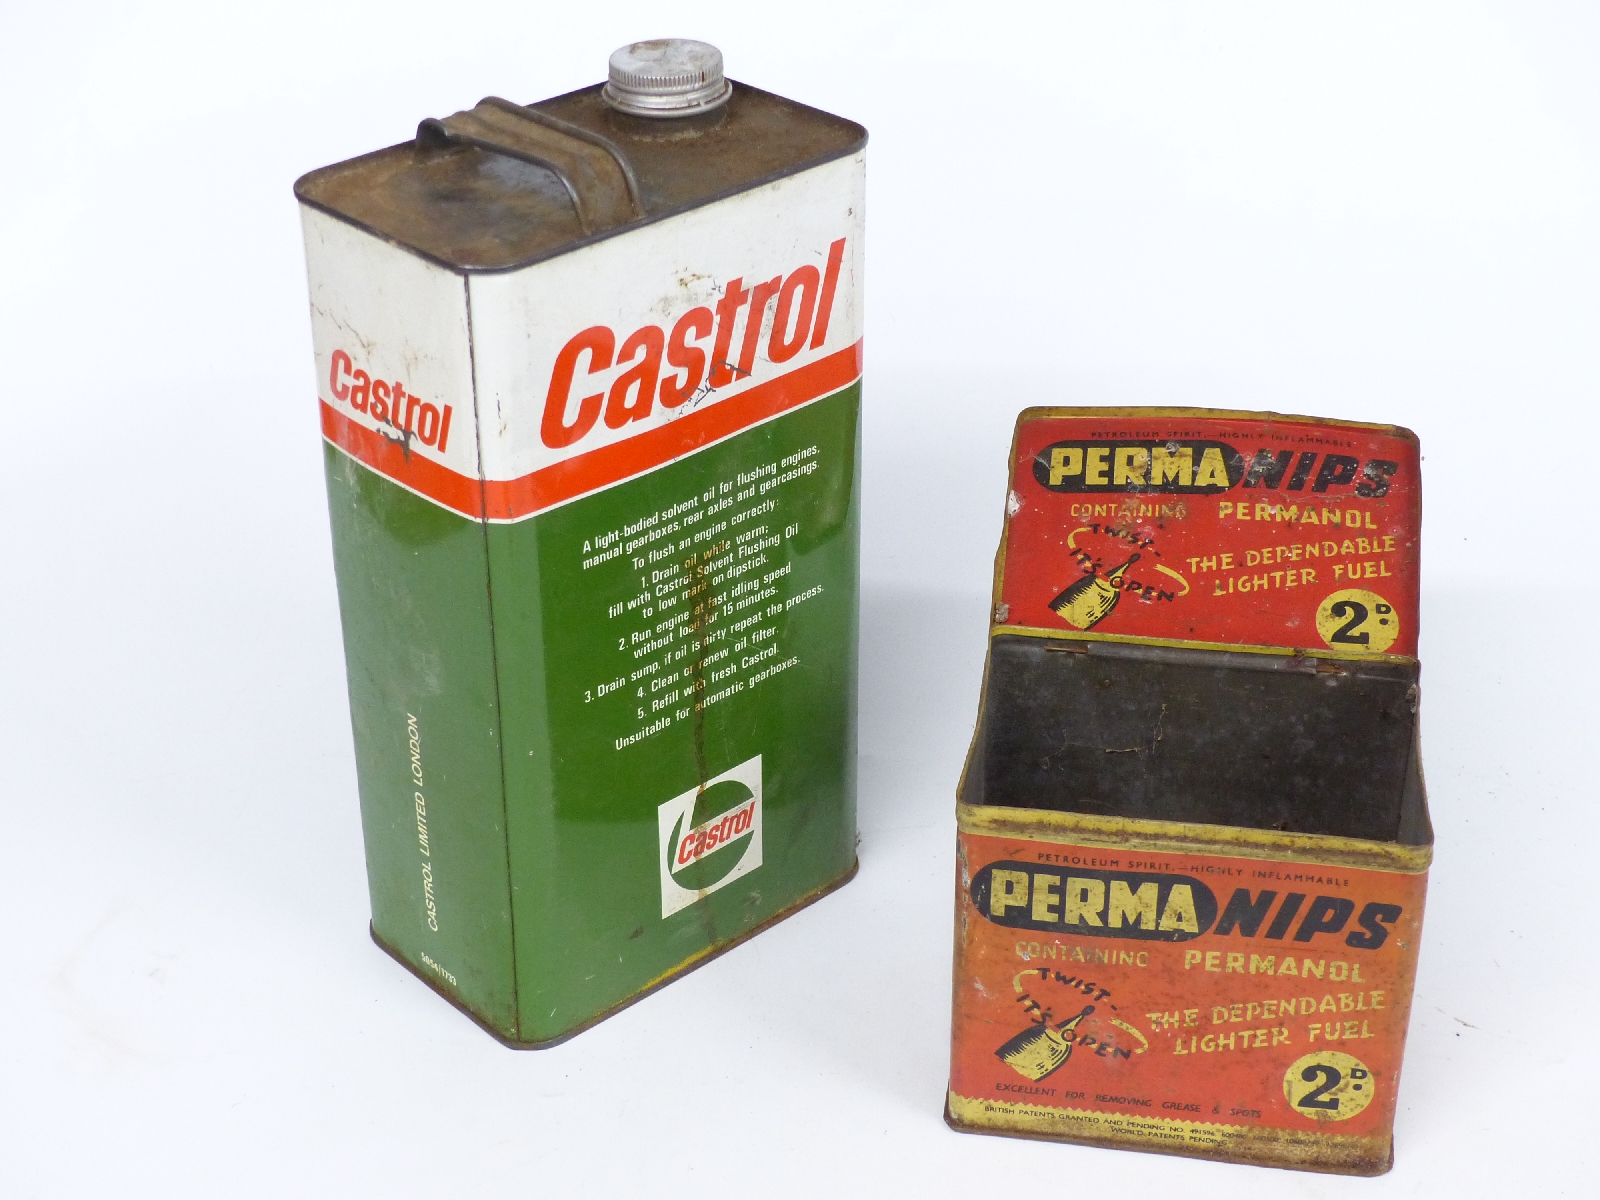 Castrol solvent flushing oil vintage 1 gallon can and a Permanips lighter fuel tin - Image 2 of 2